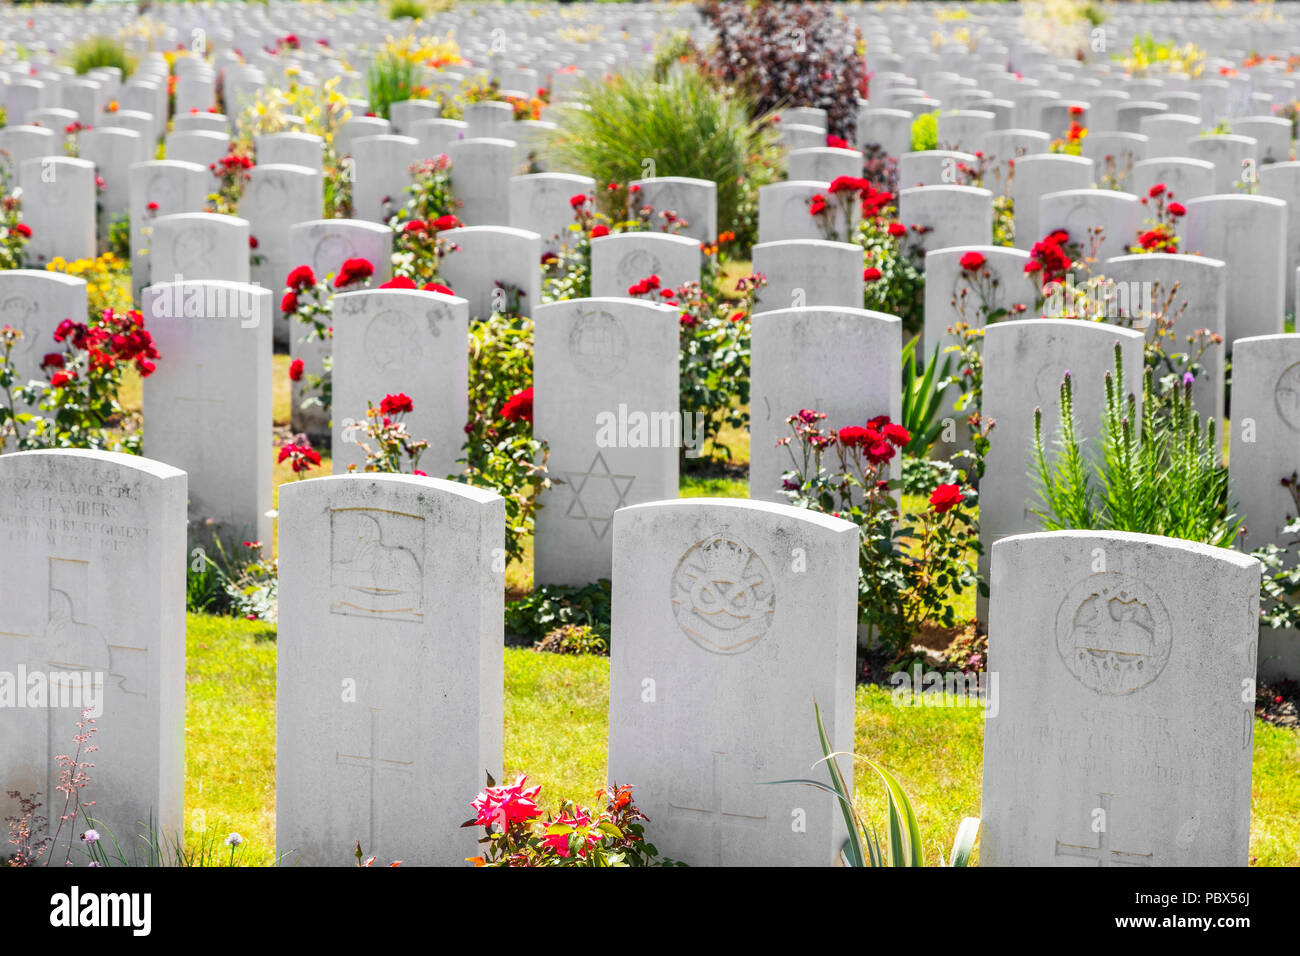 Commonwealth War graves Commission cemetery at Poelcapelle near Passchendaele, Belgium with 7500 graves including British, Canadian, Australian, New Z Stock Photo